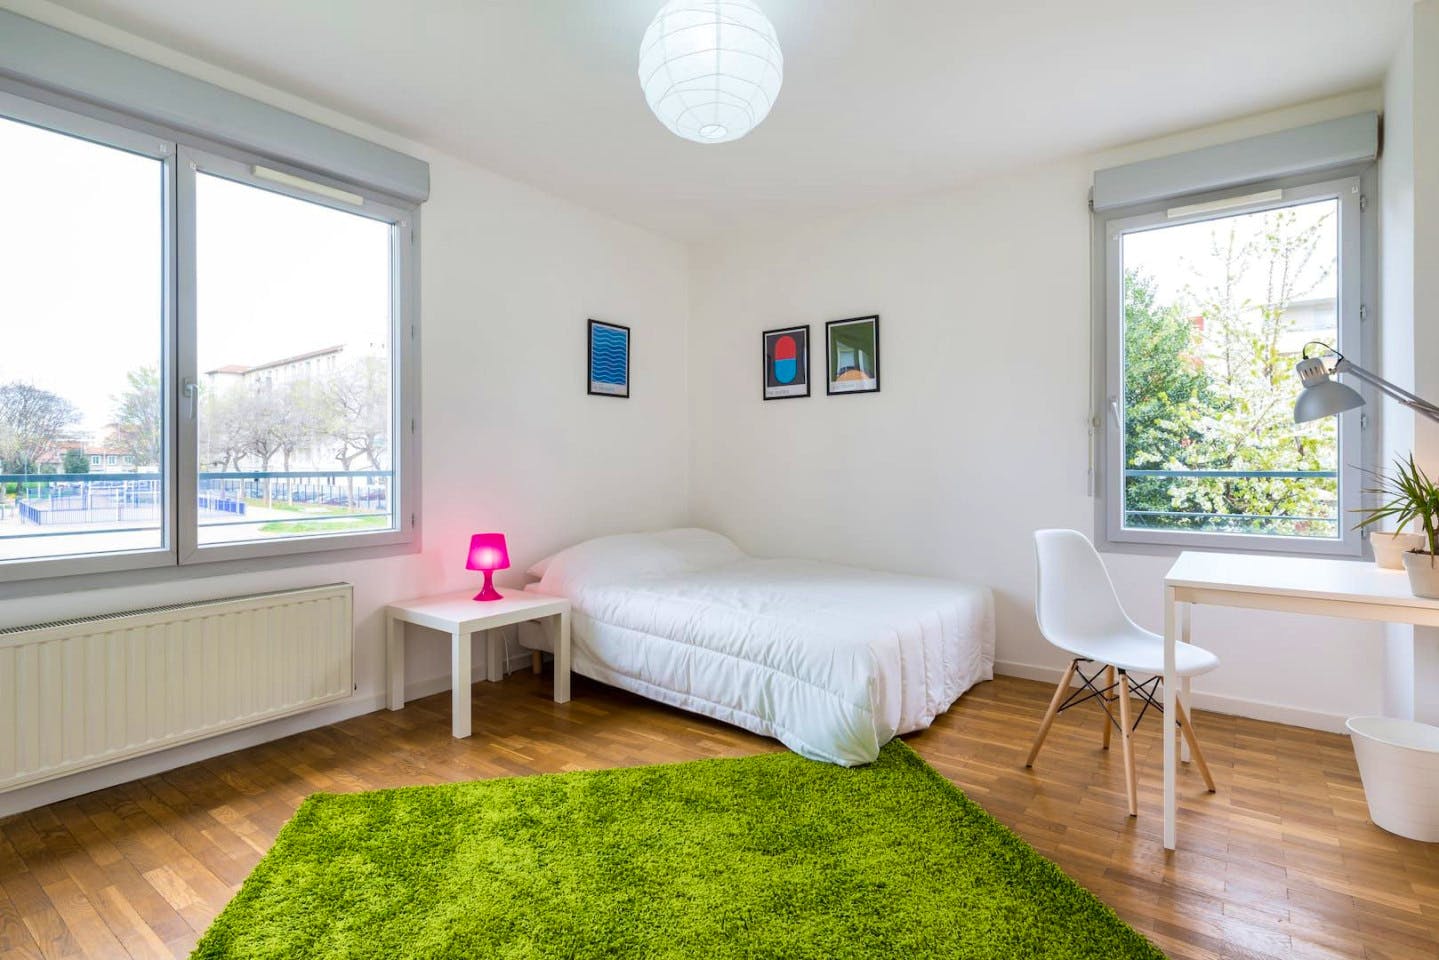 5-Bed Apartment on Avenue Debourg